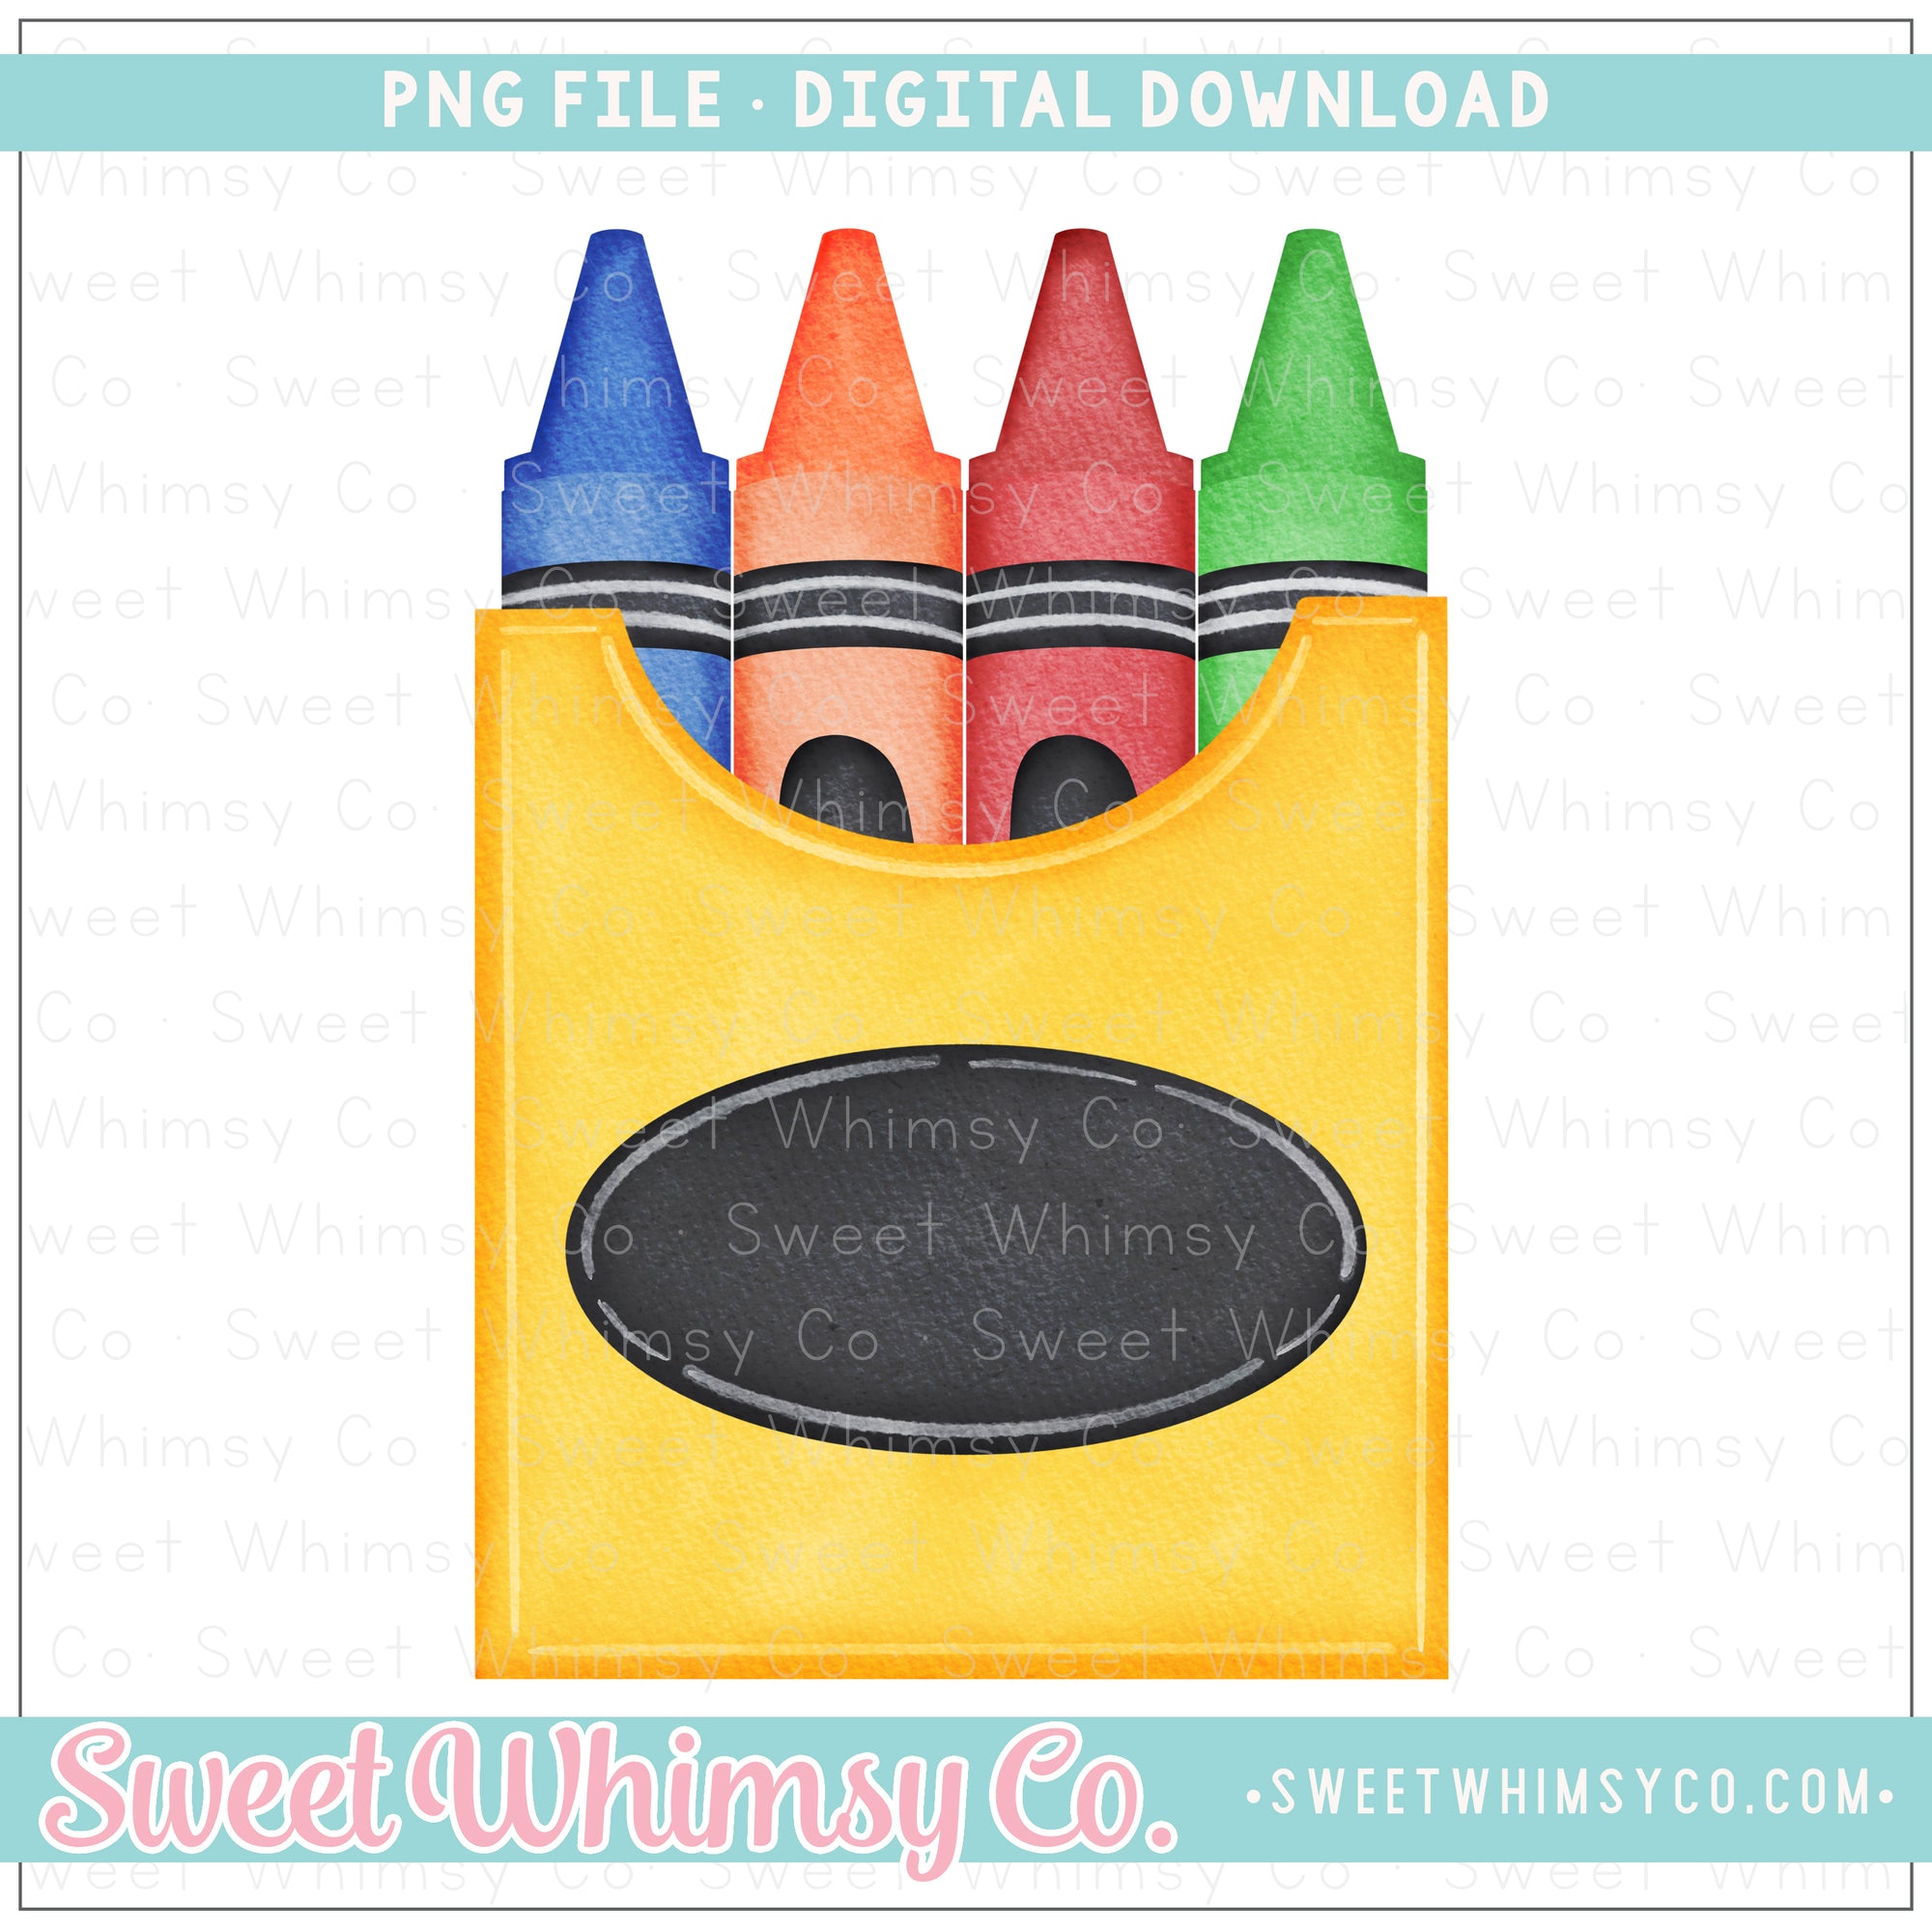 Primary Crayon Box PNG – Sweet Whimsy Co